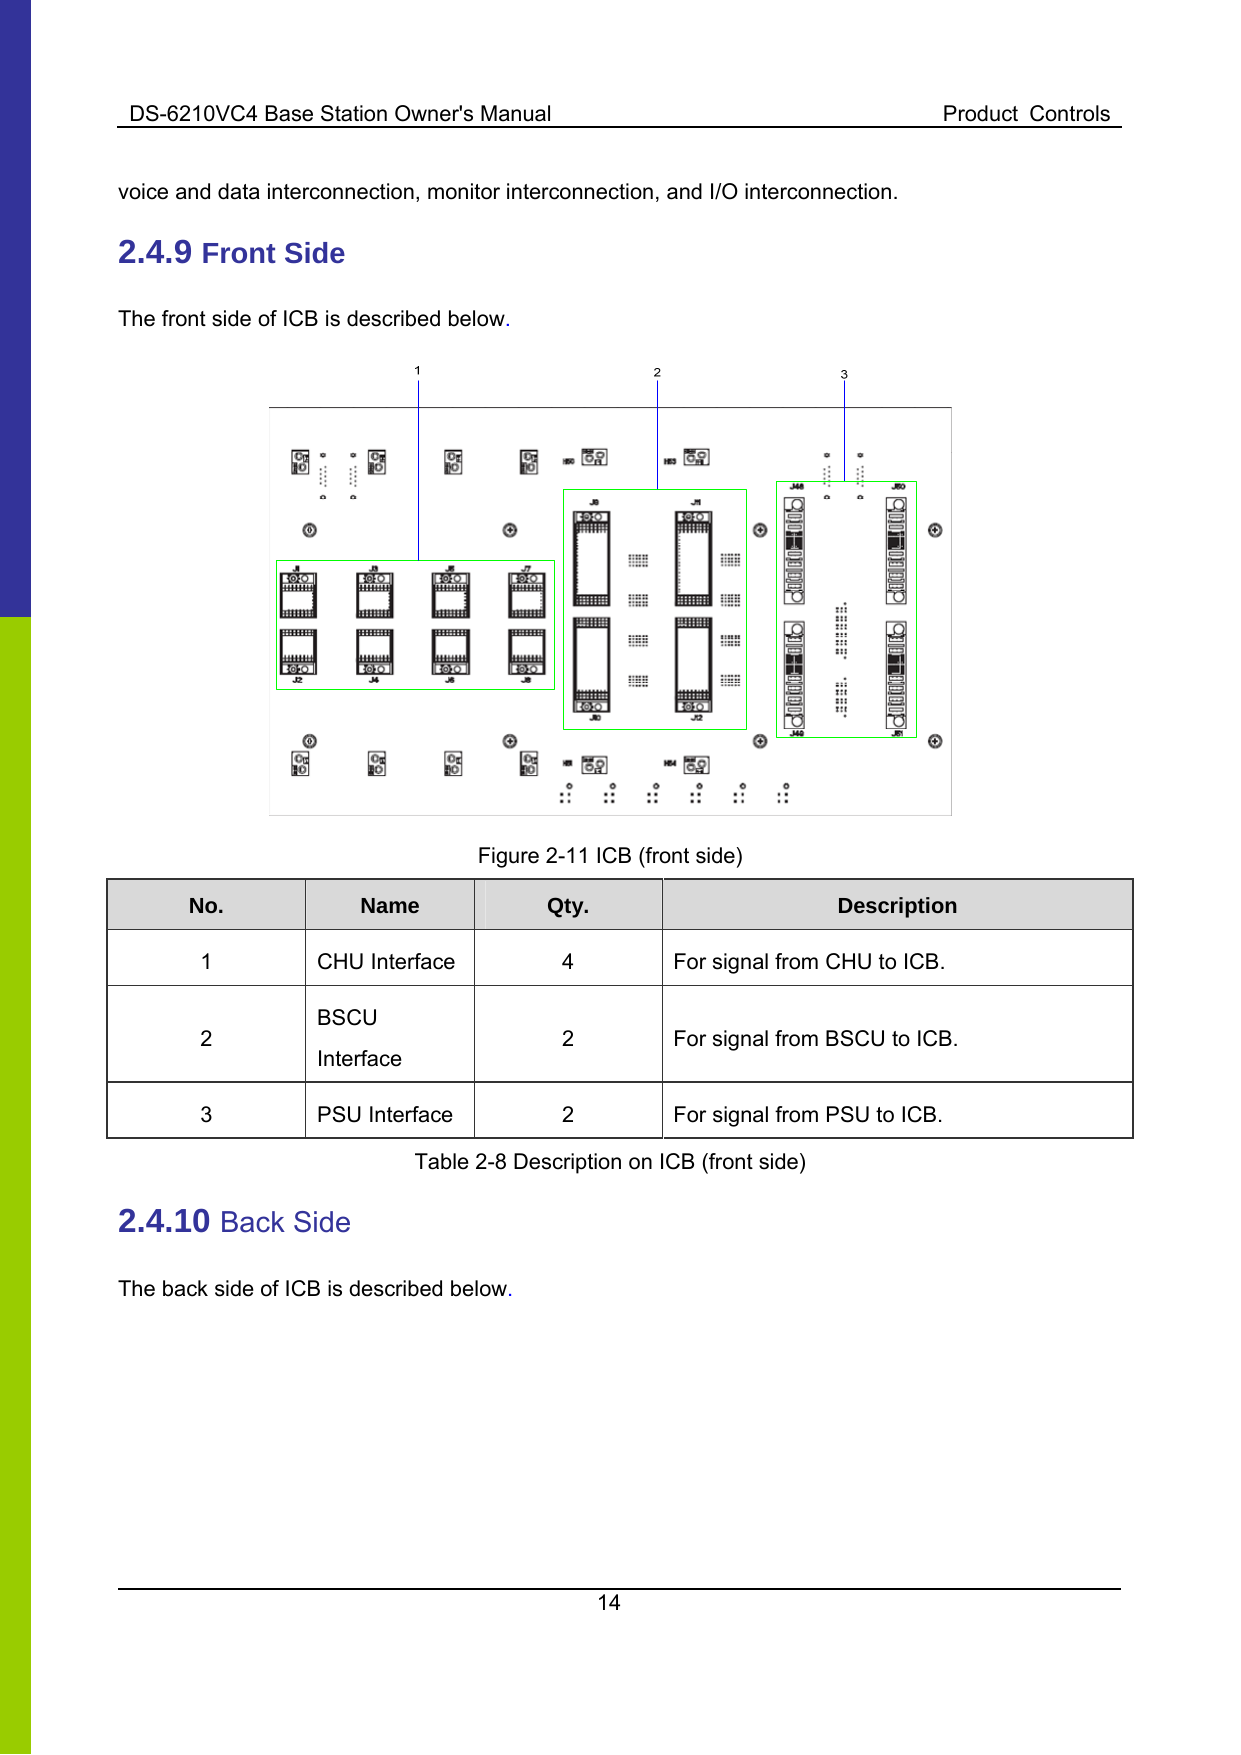 DS-6210VC4 Base Station Owner&apos;s Manual  Product  Controls 14  voice and data interconnection, monitor interconnection, and I/O interconnection.   2.4.9 Front Side The front side of ICB is described below.    Figure 2-11 ICB (front side) No.  Name   Qty.  Description 1  CHU Interface  4  For signal from CHU to ICB. 2 BSCU Interface 2  For signal from BSCU to ICB. 3  PSU Interface  2  For signal from PSU to ICB. Table 2-8 Description on ICB (front side) 2.4.10 Back Side The back side of ICB is described below. 